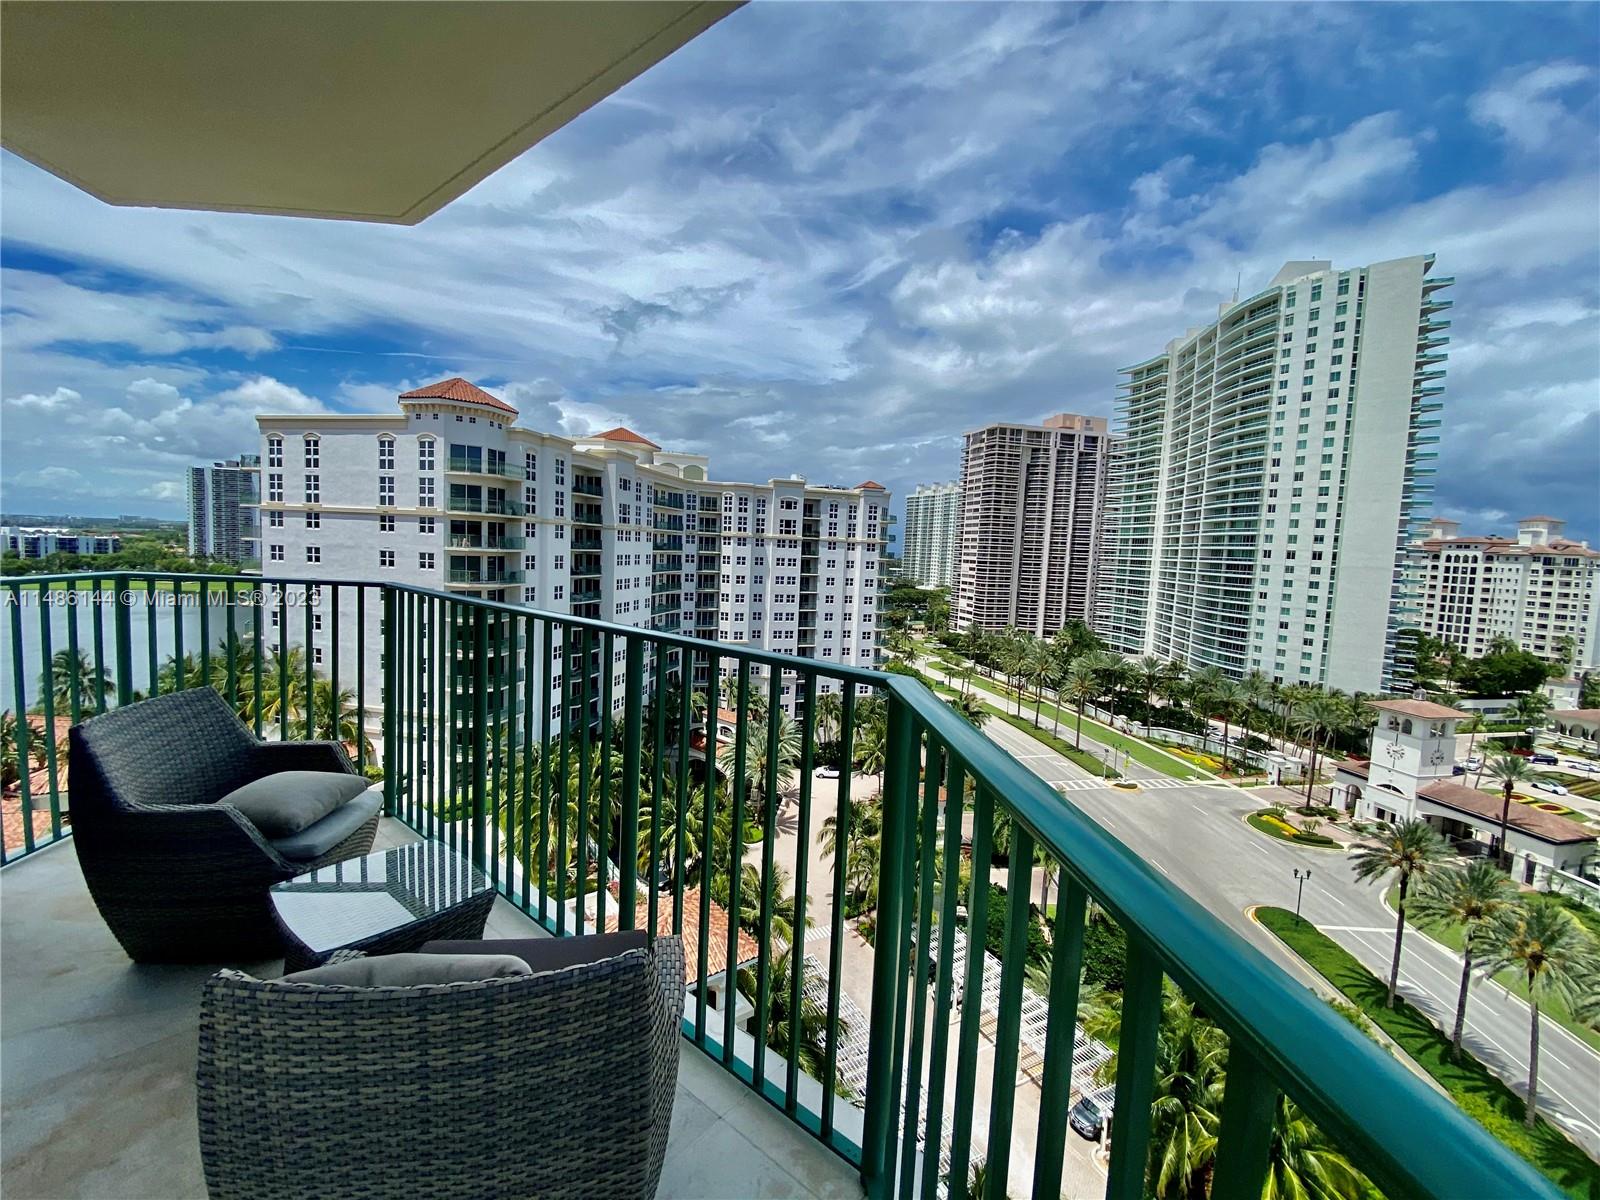 Photo 23 of Turnberry Village So Towe Apt 1220 in Aventura - MLS A11486144